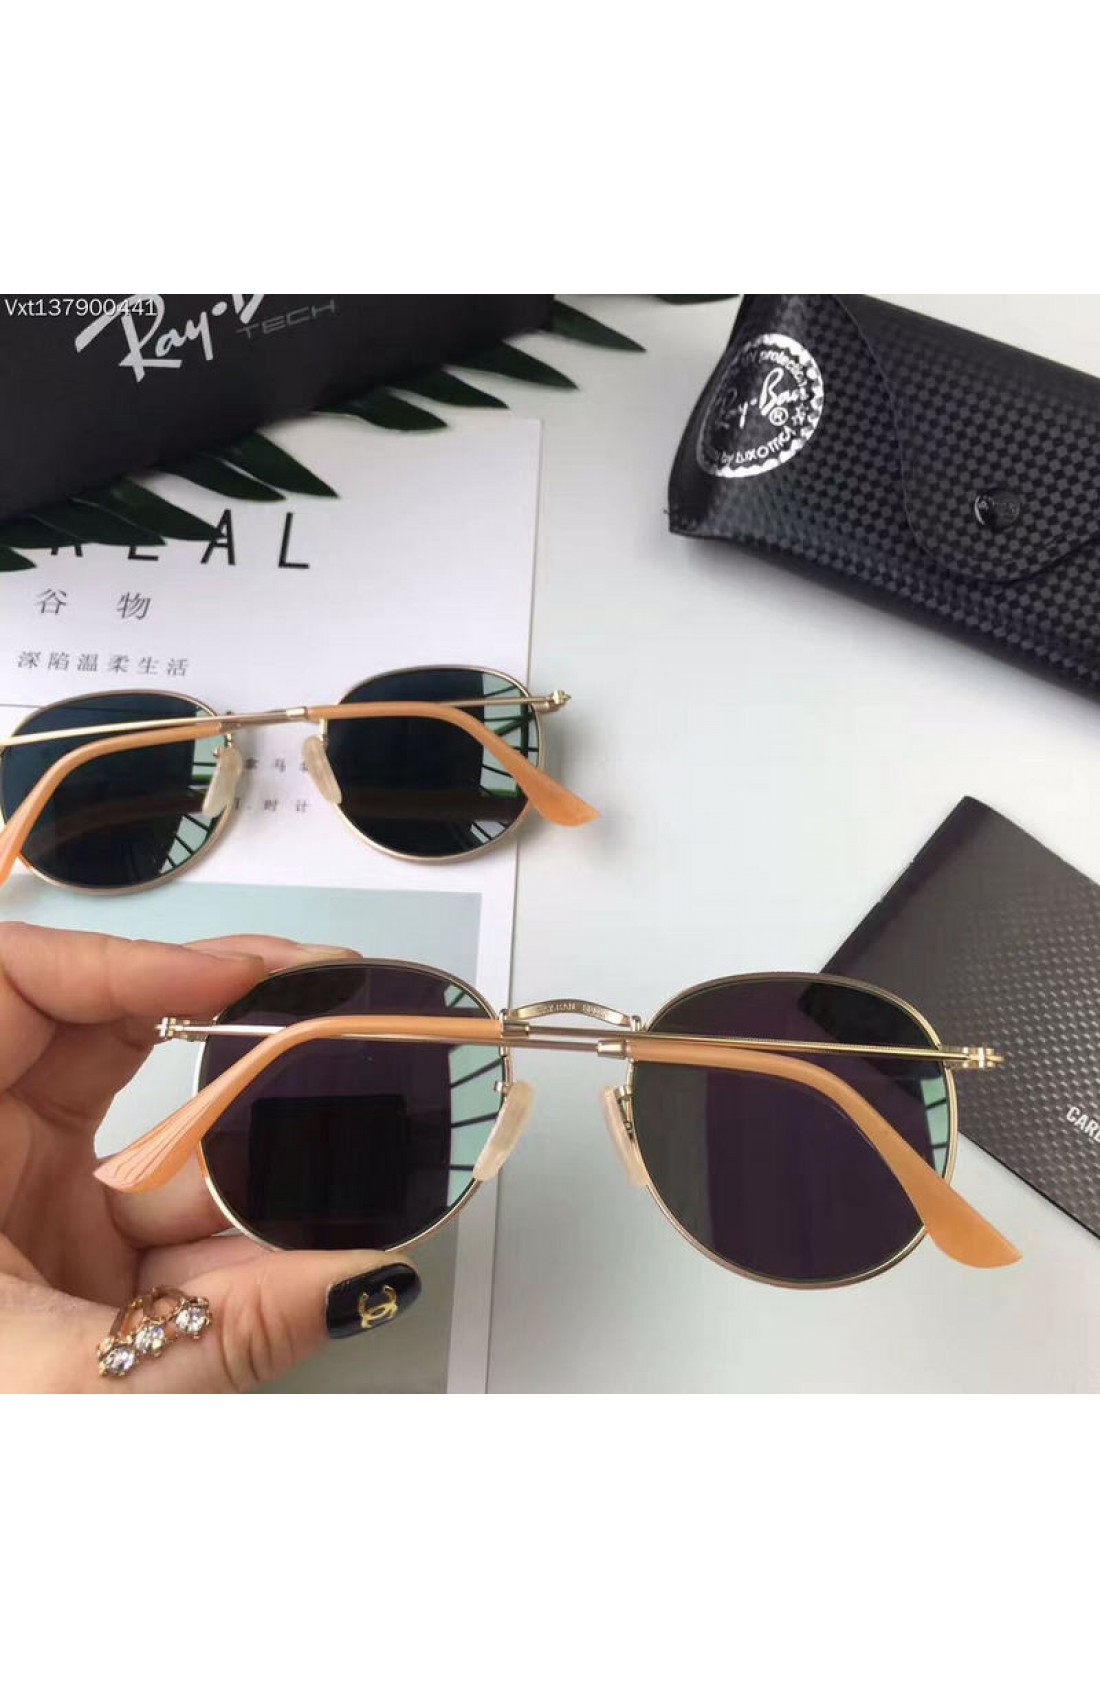 ray ban sunglasses outlet store